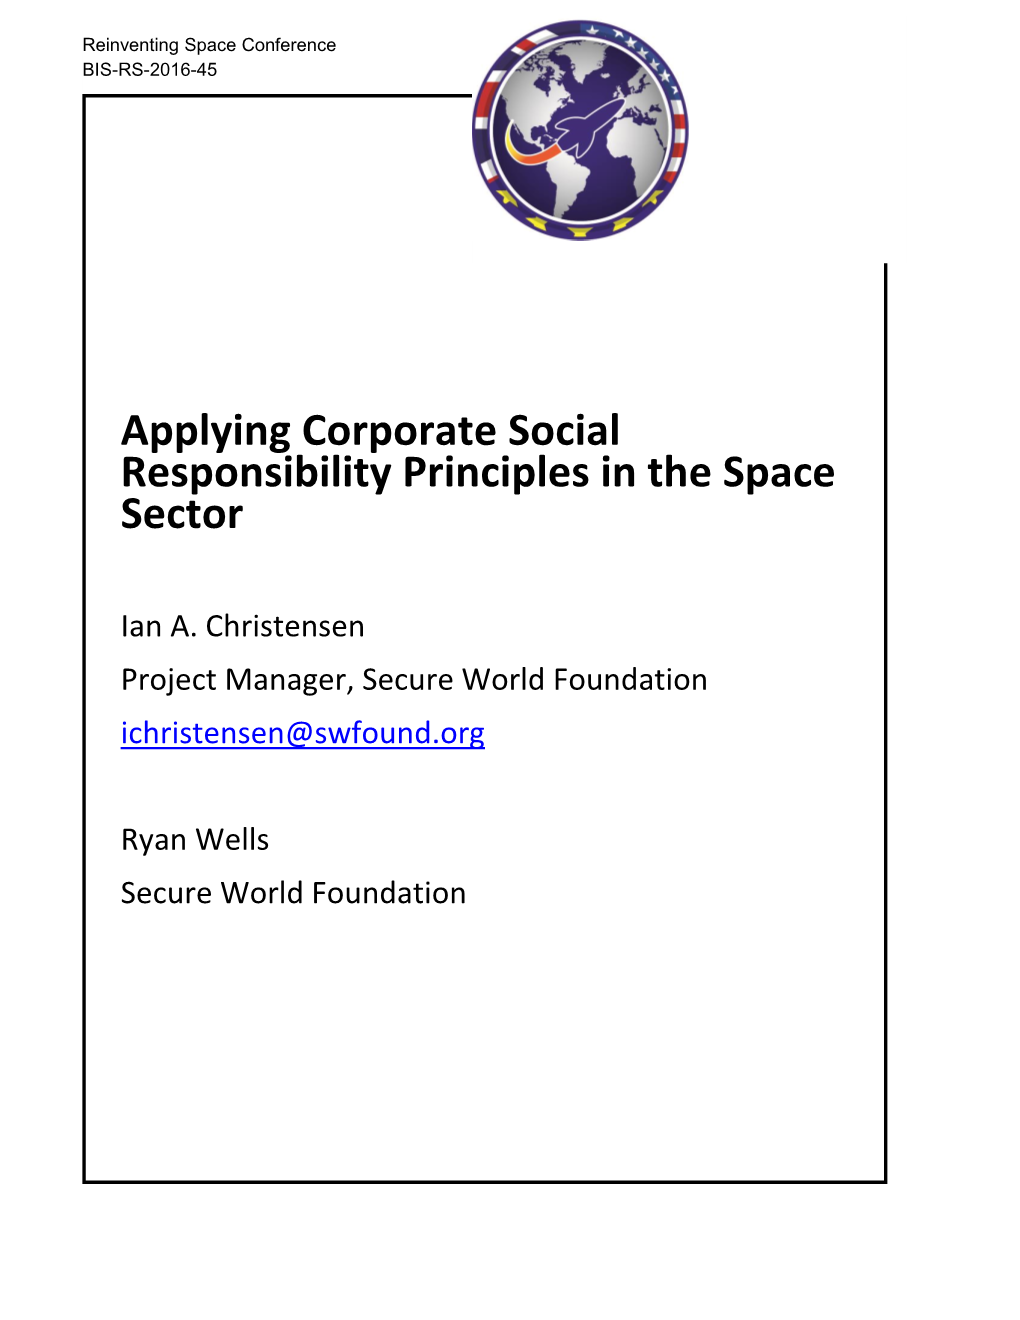 Applying Corporate Social Responsibility Principles in the Space Sector